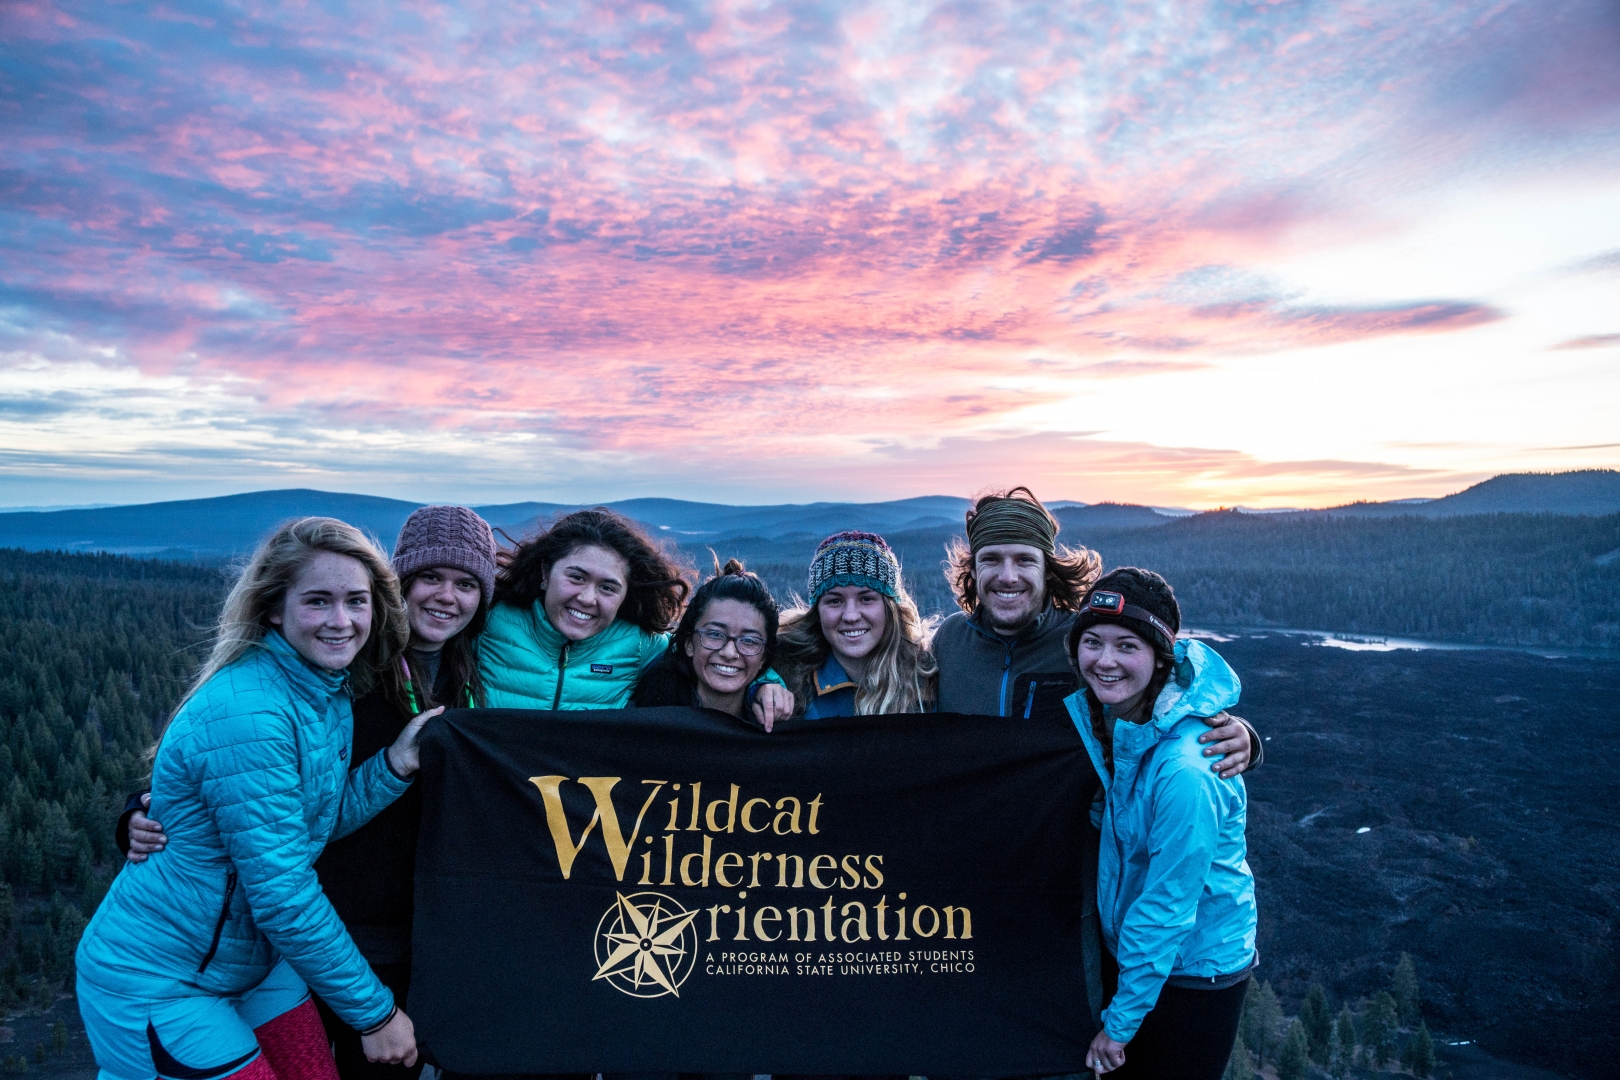 Students hold a Wildcat Wilderness Orientation sign at the top of a mountain with a colorful sky behind them.